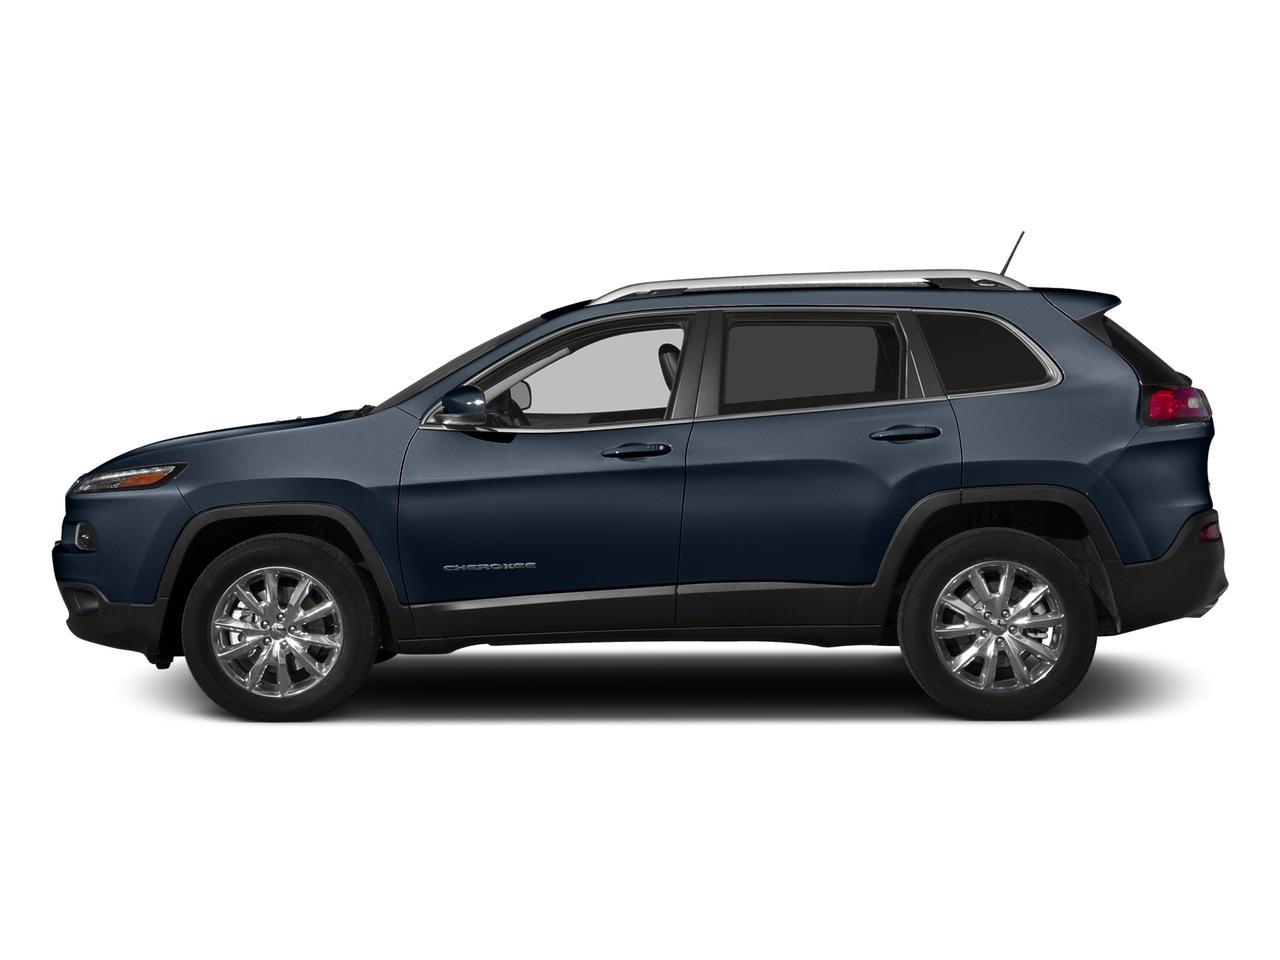 Used 2015 Jeep Cherokee Sport with VIN 1C4PJMAB1FW712820 for sale in Dry Prong, LA